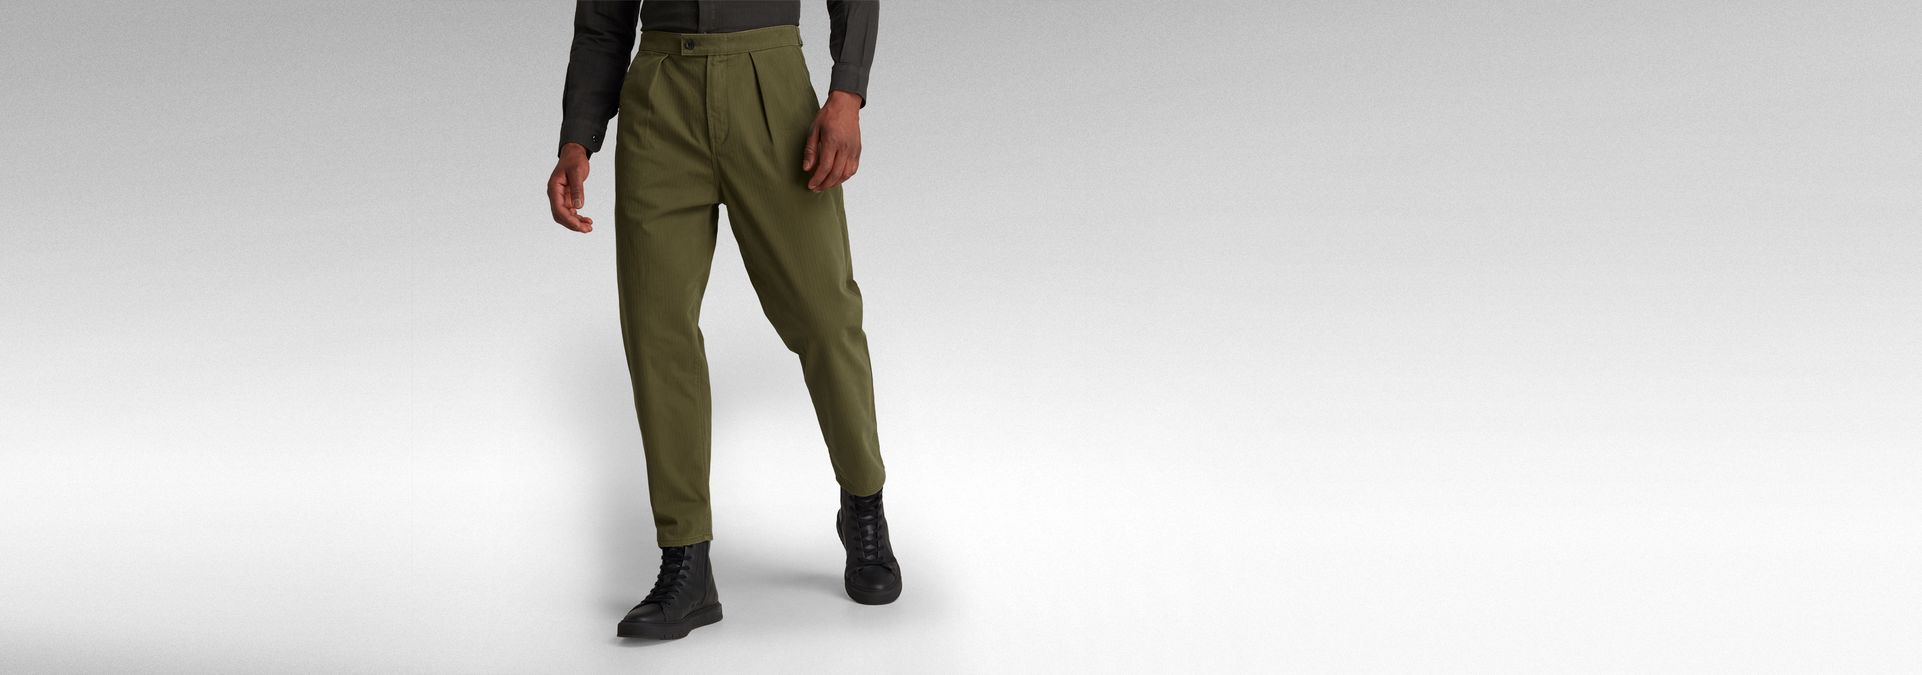 Worker Chino Relaxed Pants | Green | G-Star RAW®